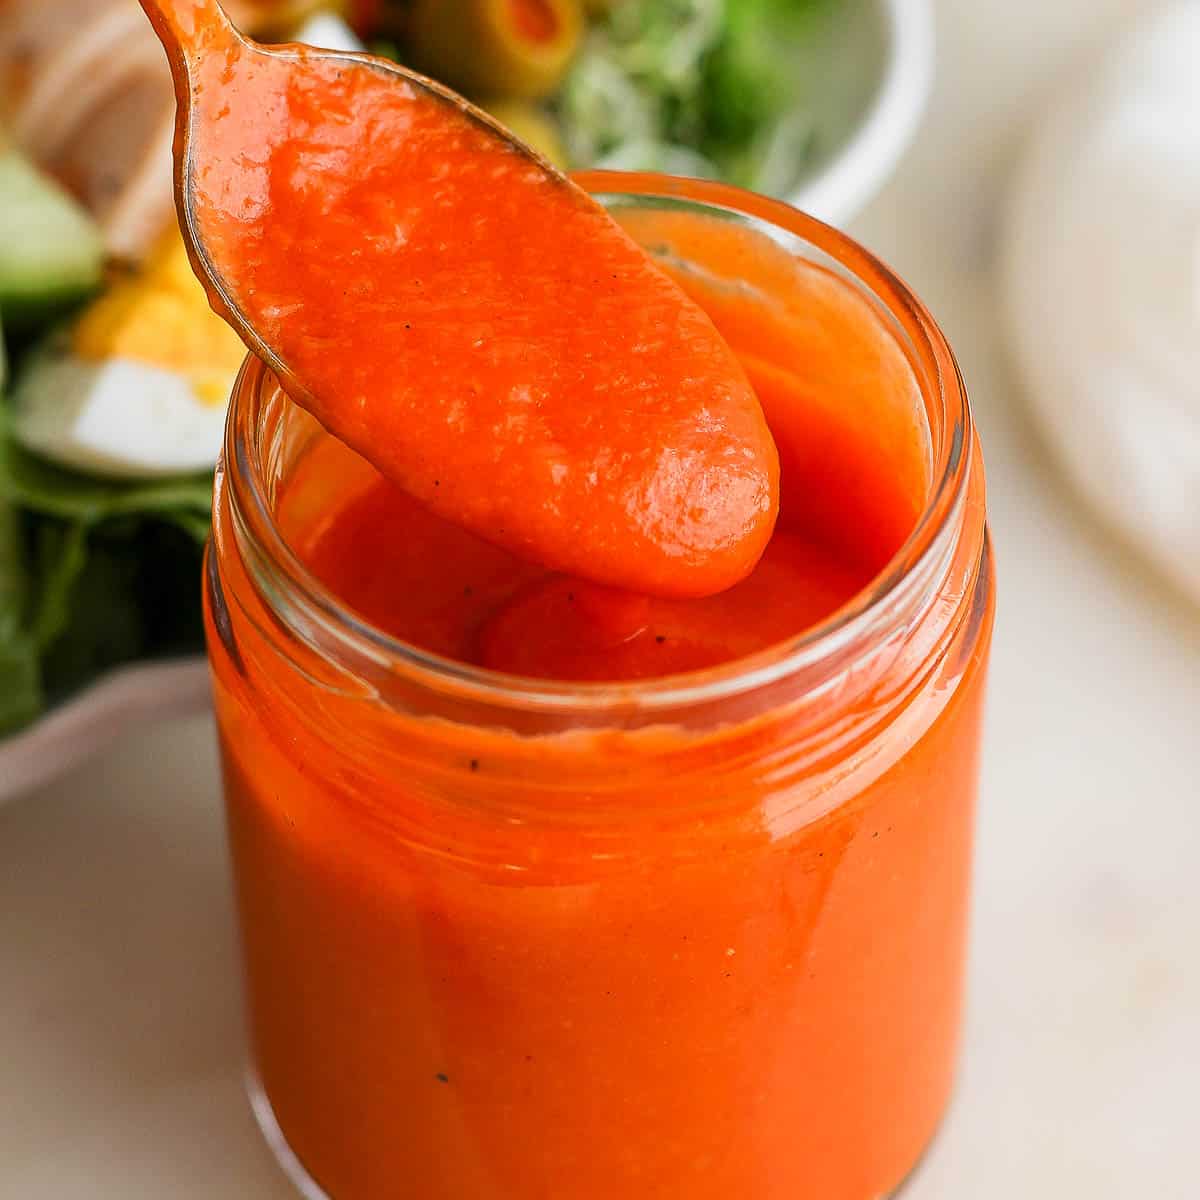 A jar of homemade French dressing with a spoon pulling some out.